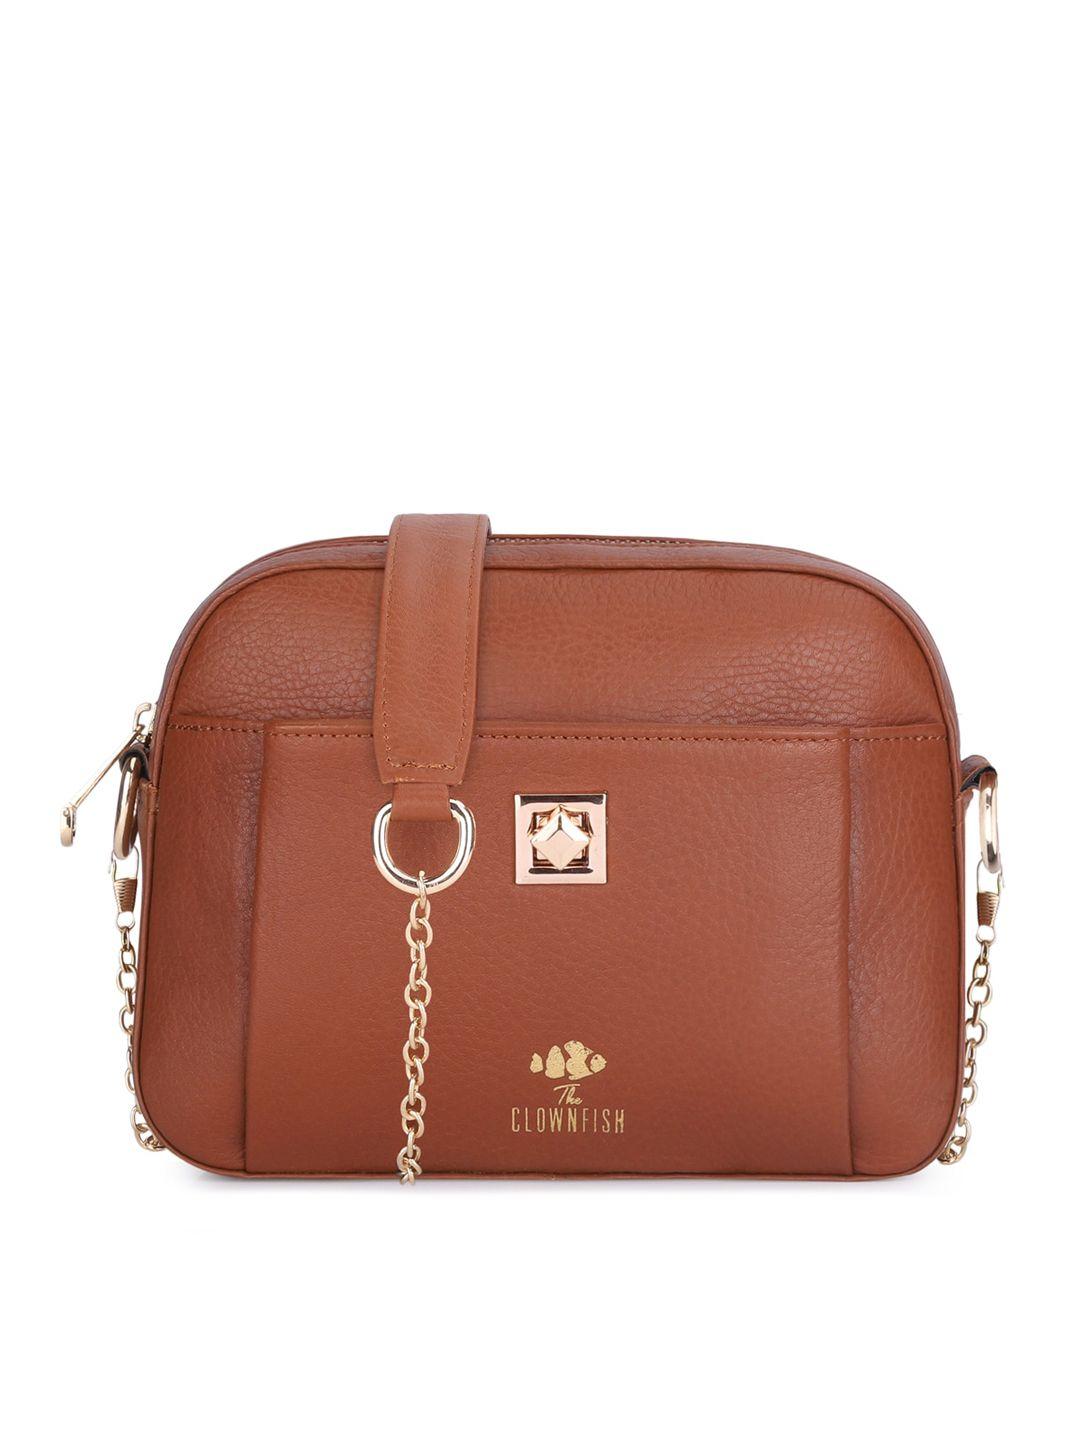 the clownfish brown leather structured sling bag